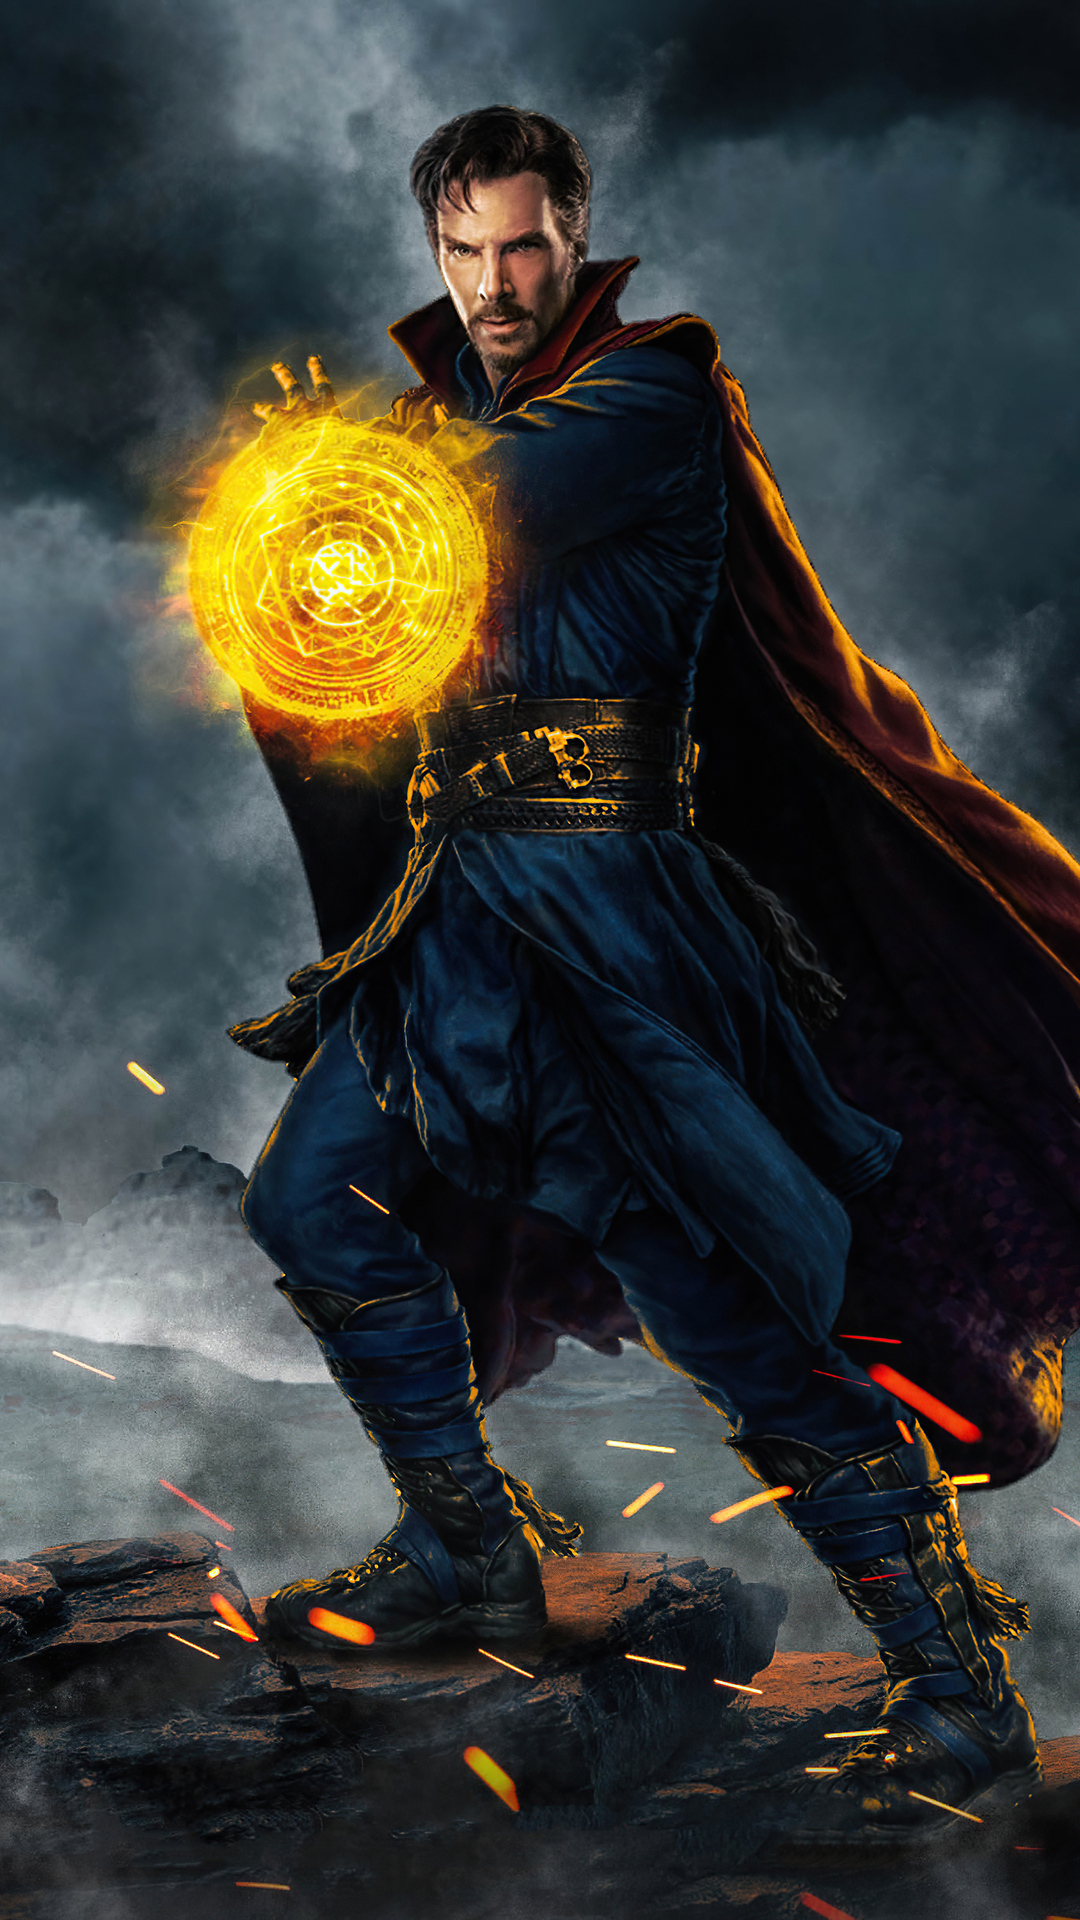 1080x1920 2020 Doctor Strange 4k Iphone 7,6s,6 Plus, Pixel xl ,One Plus  3,3t,5 HD 4k Wallpapers, Images, Backgrounds, Photos and Pictures